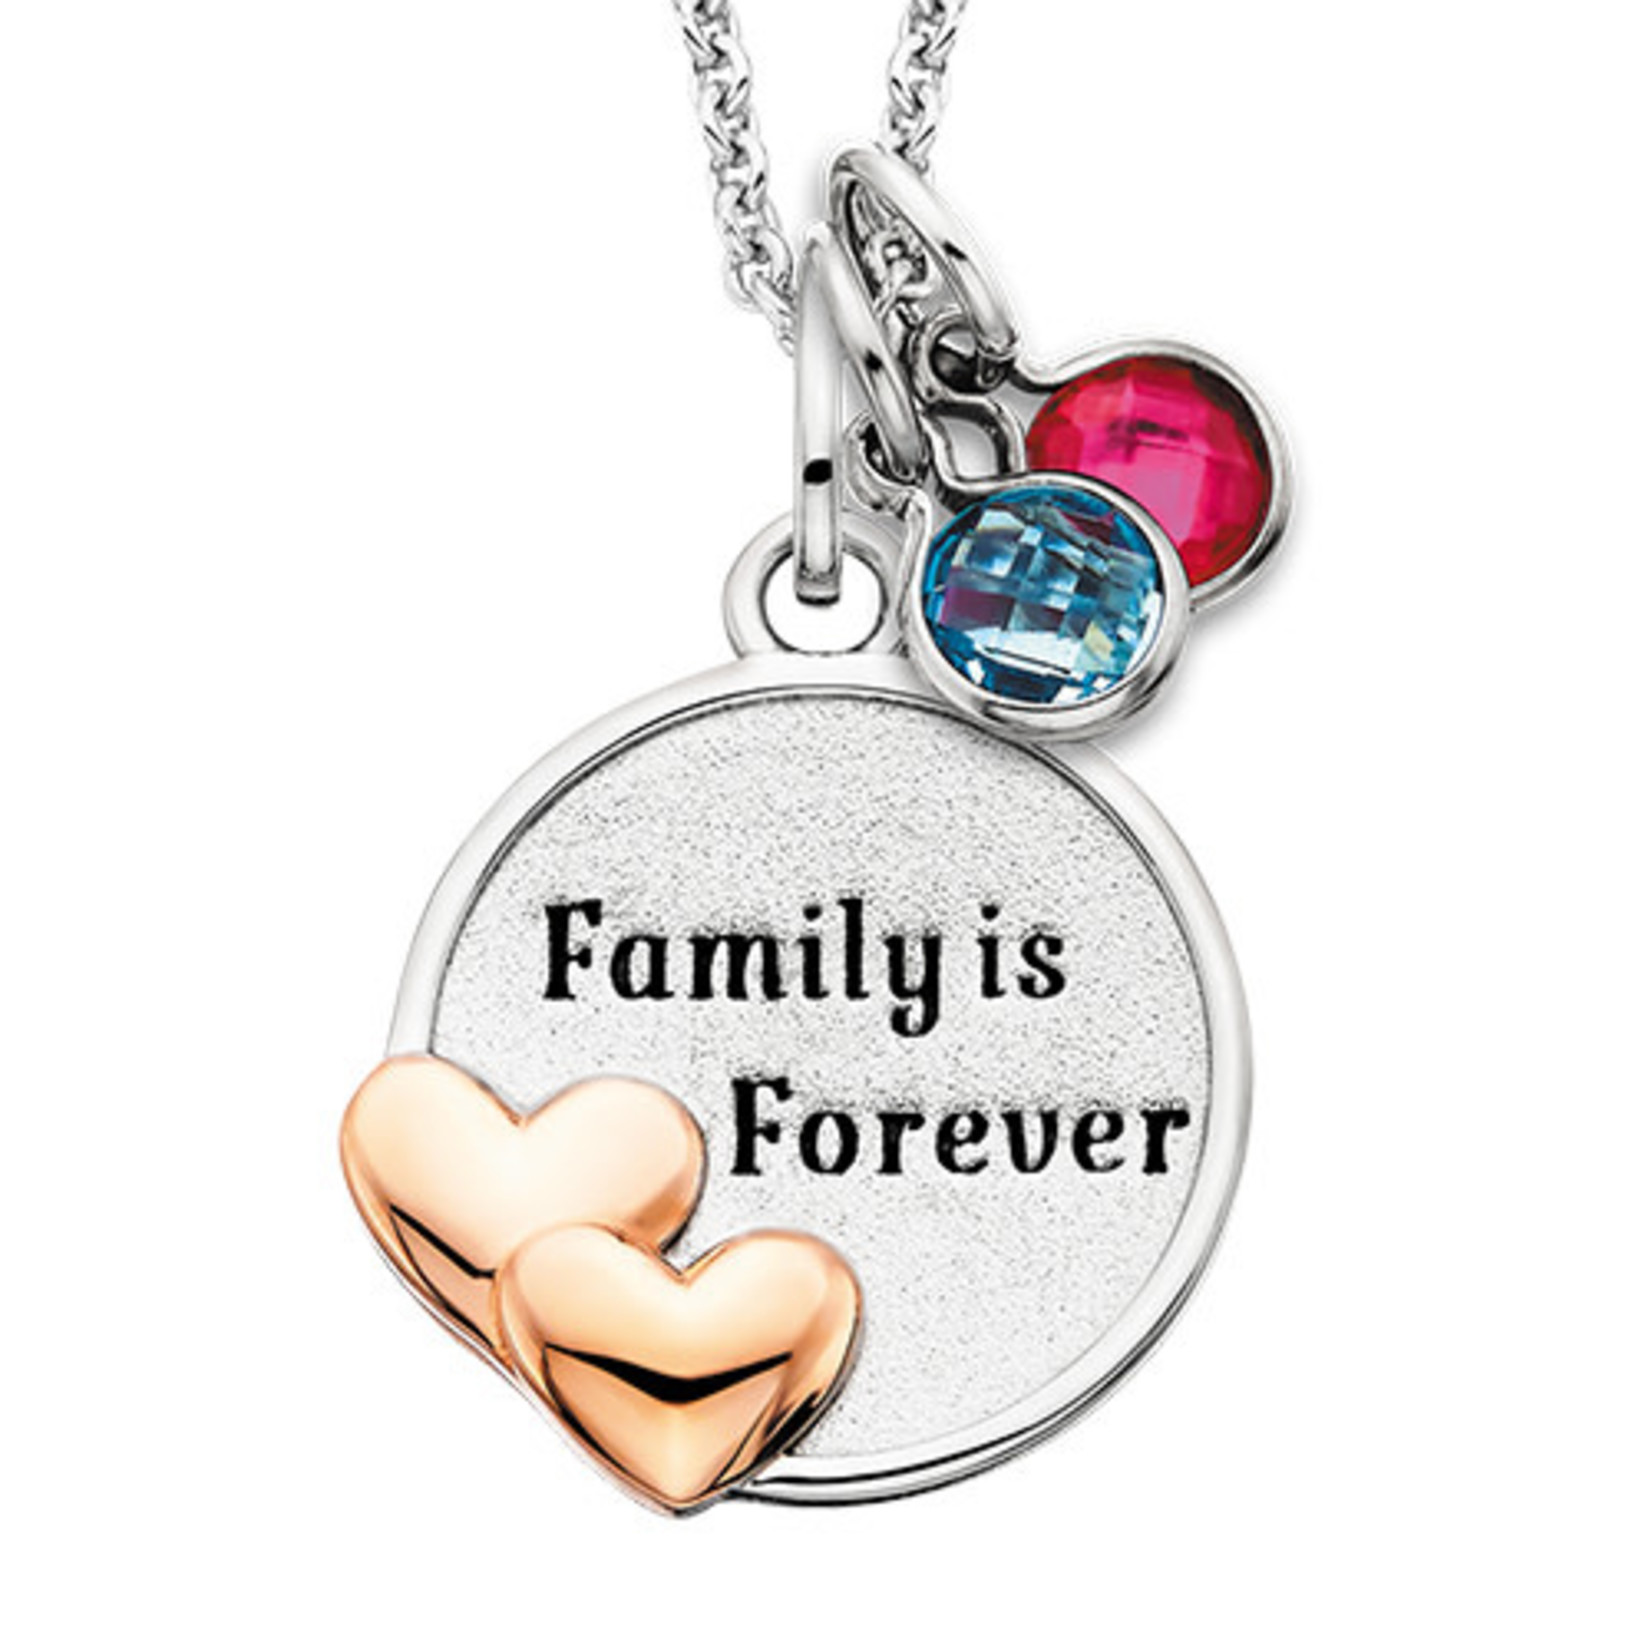 THE BERCO COMPANY, INC. Mommy Chic “Family is Forever” Pendant